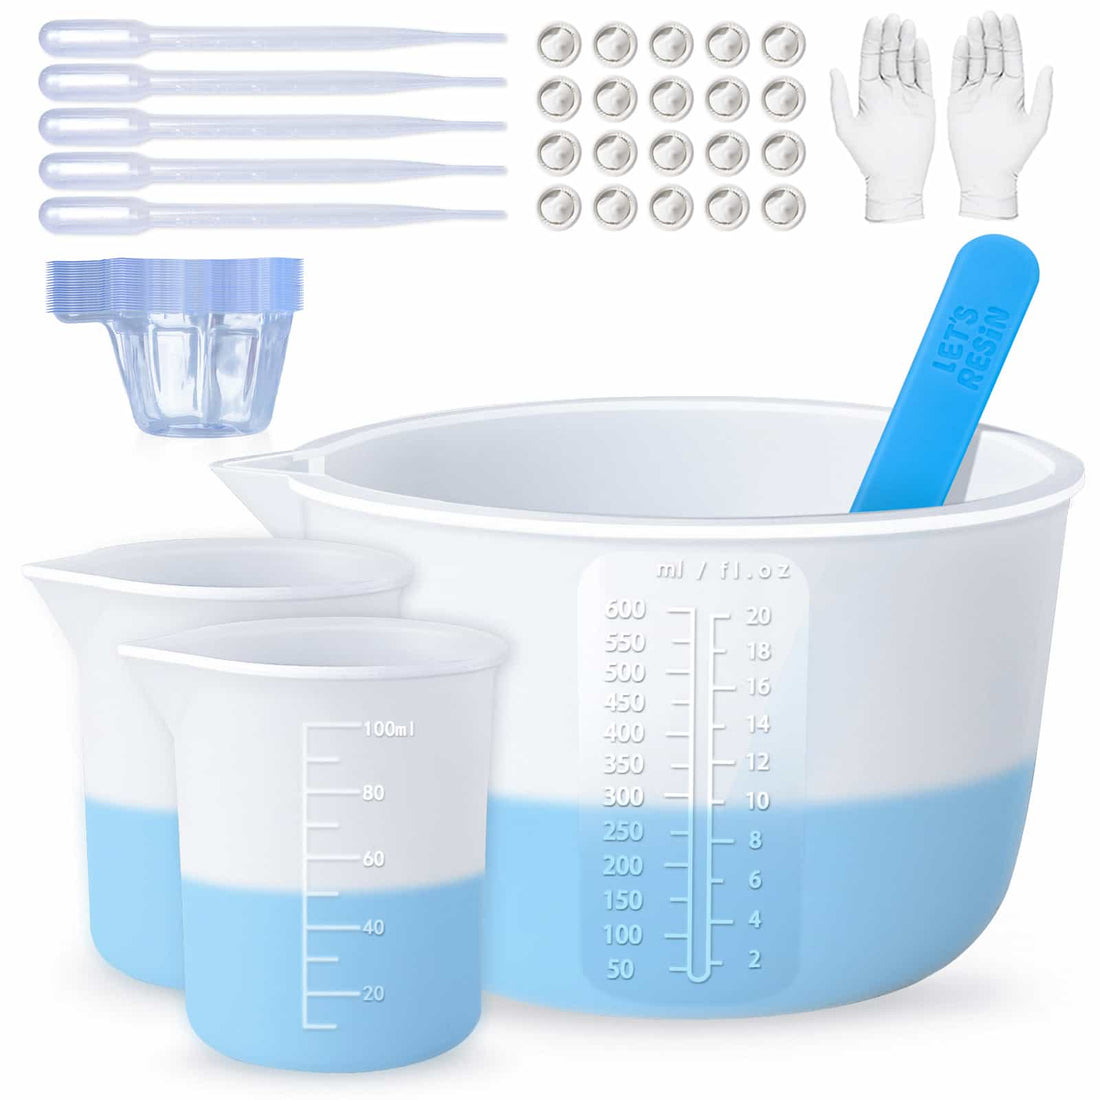 Epoxy Resin Kit – Resin Kit with Silicone Spatula, Mixing Cup and Spre –  HavenLab